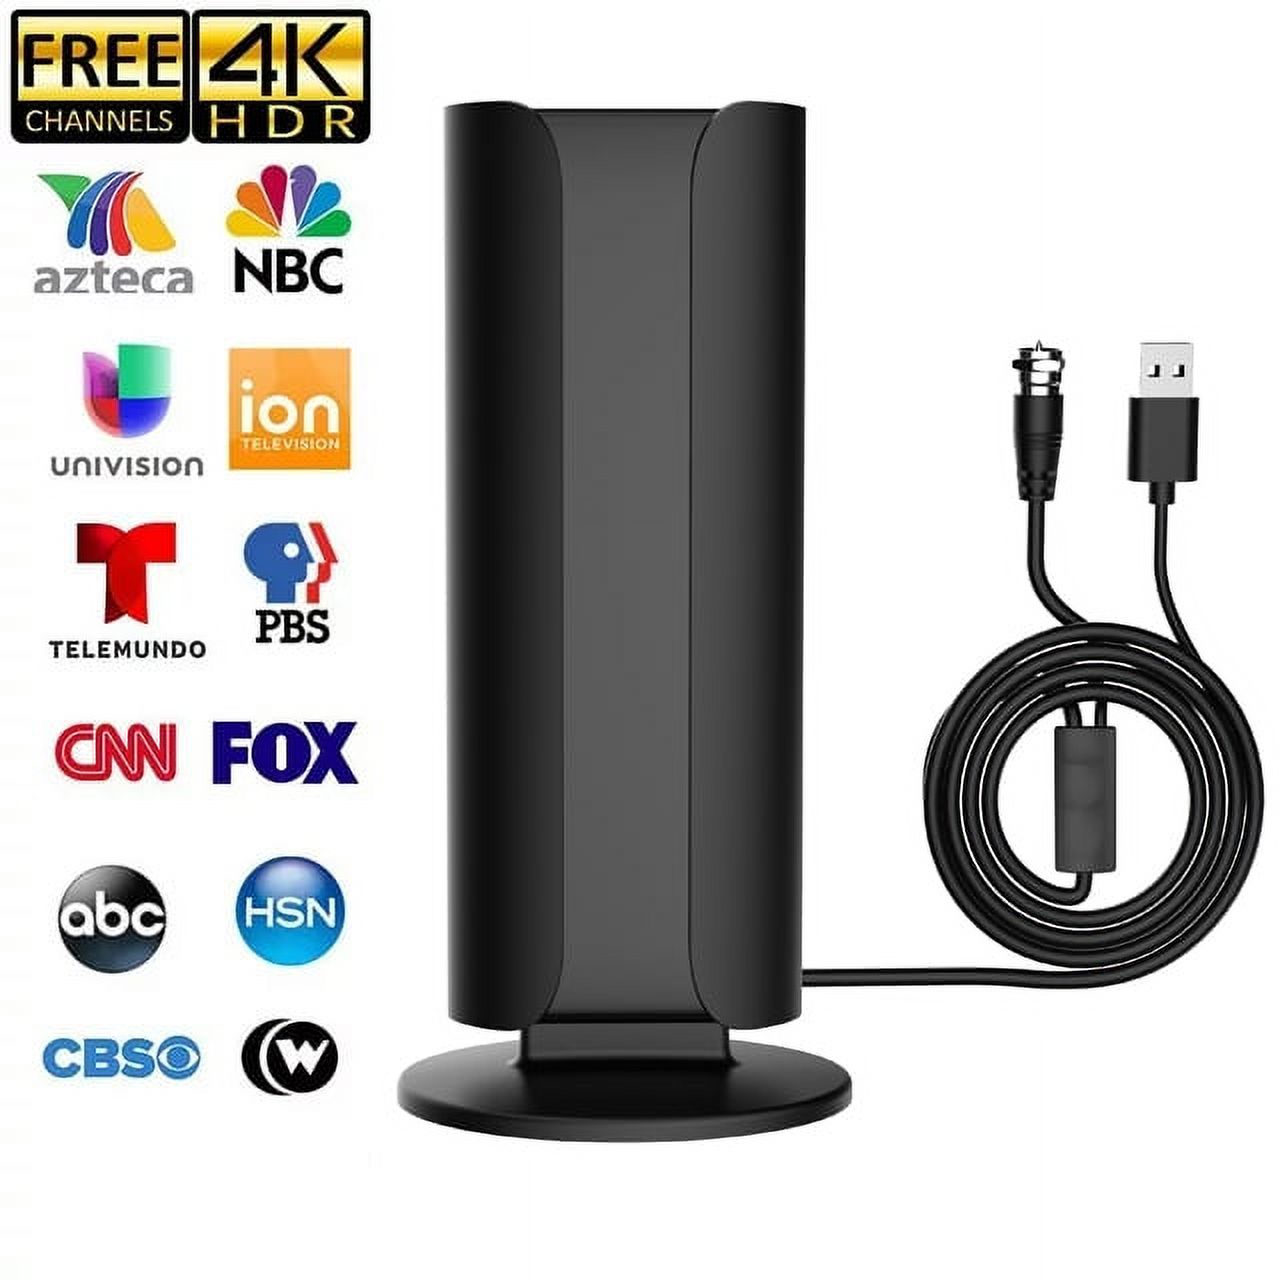 TV Antenna, 2023 Newest HDTV Antenna Support 4K 1080P, Upgraded Amplified Signal Booster HD Digital TV Antenna Long 150 Miles Range, UHF VHF Freeview HDTV Channels with 14.8ft Coax Cable - image 1 of 9